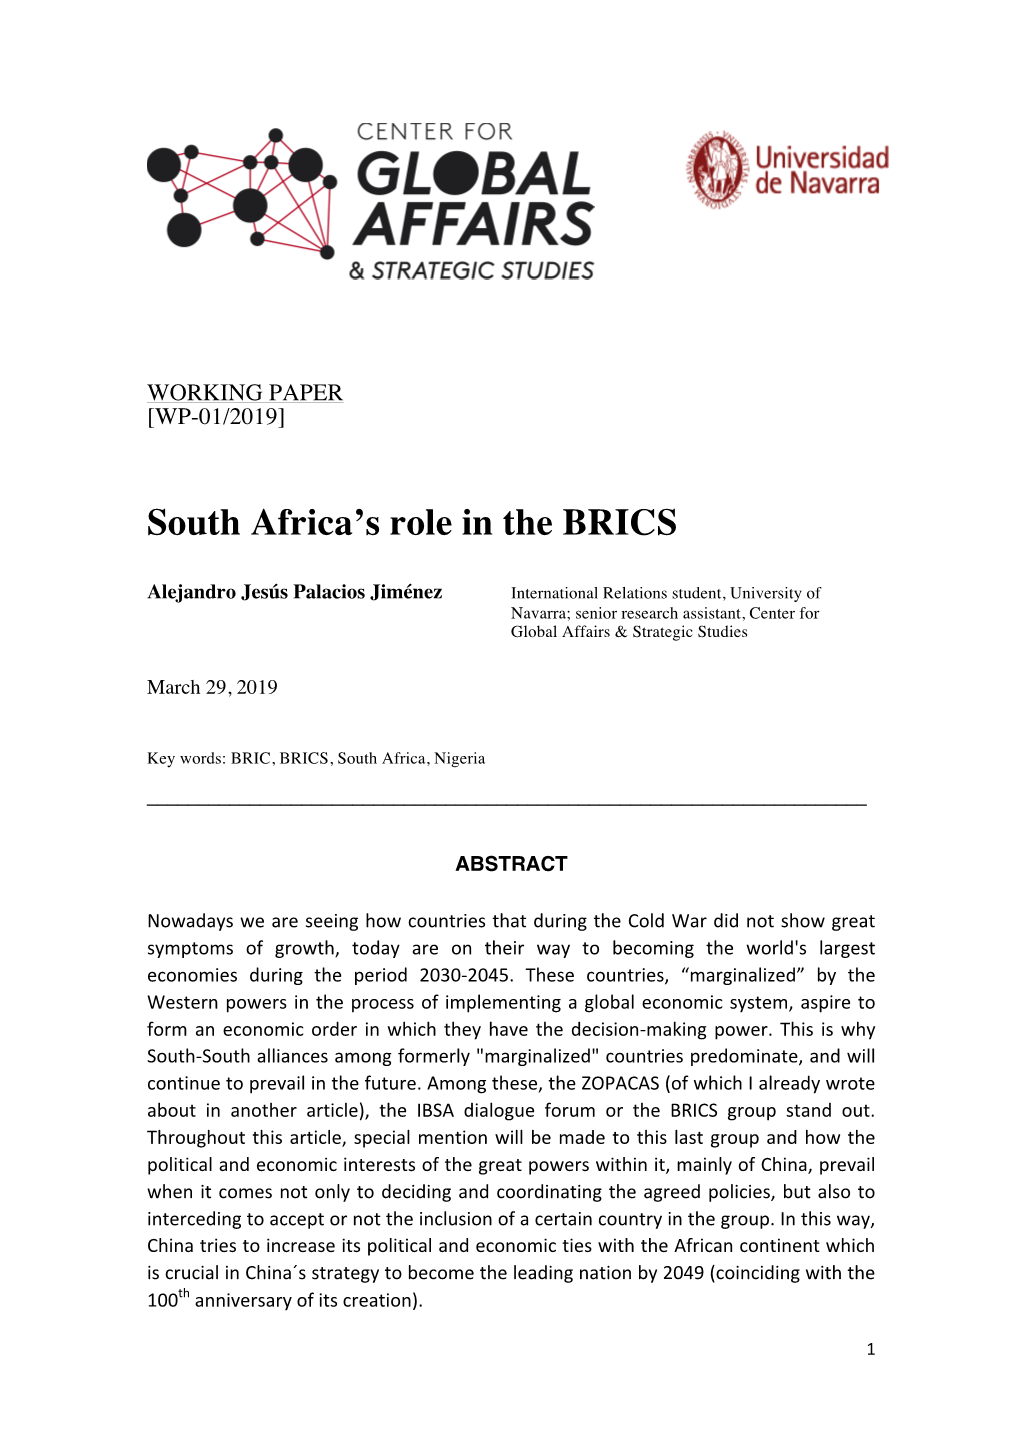 South Africa's Role in the BRICS